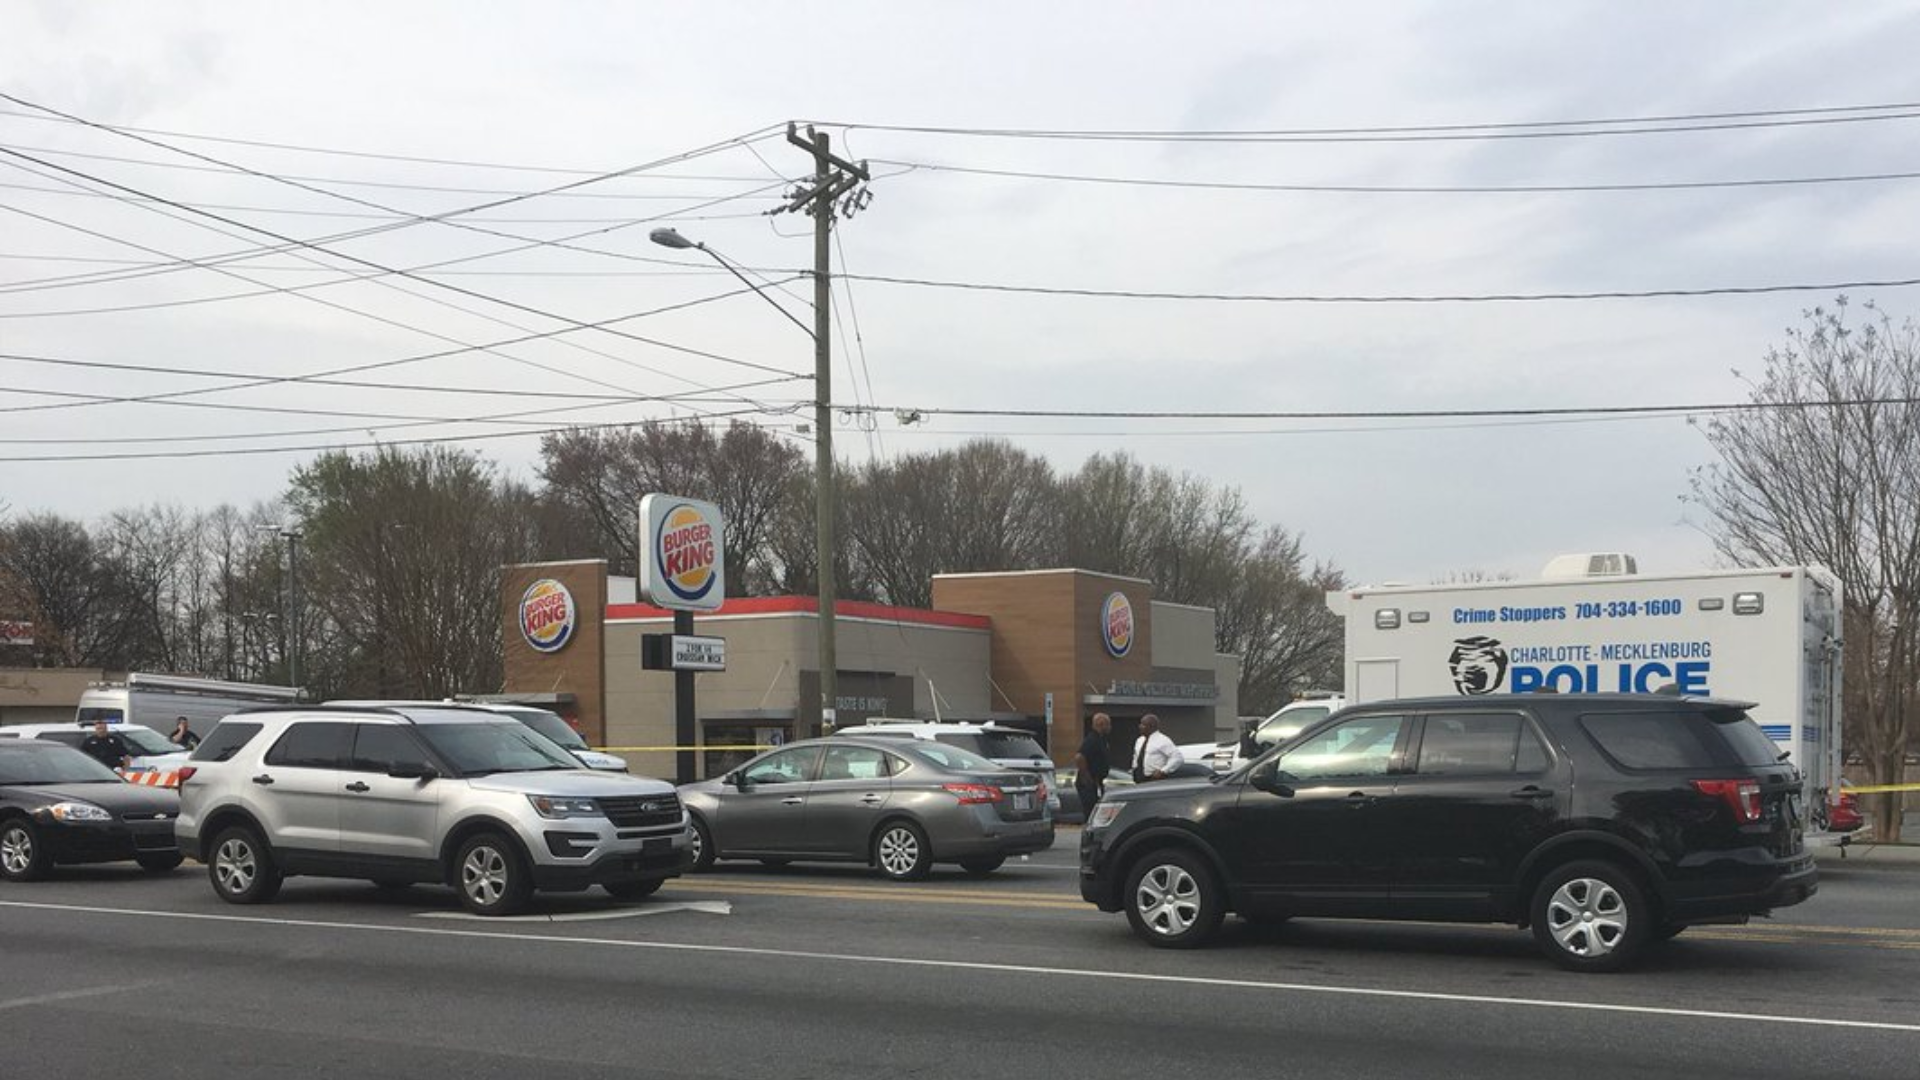 Charlotte-Mecklenburg Police are investigating after detectives said an armed man was shot and killed by an officer in the parking lot of a Burger King restaurant in north Charlotte Monday morning.